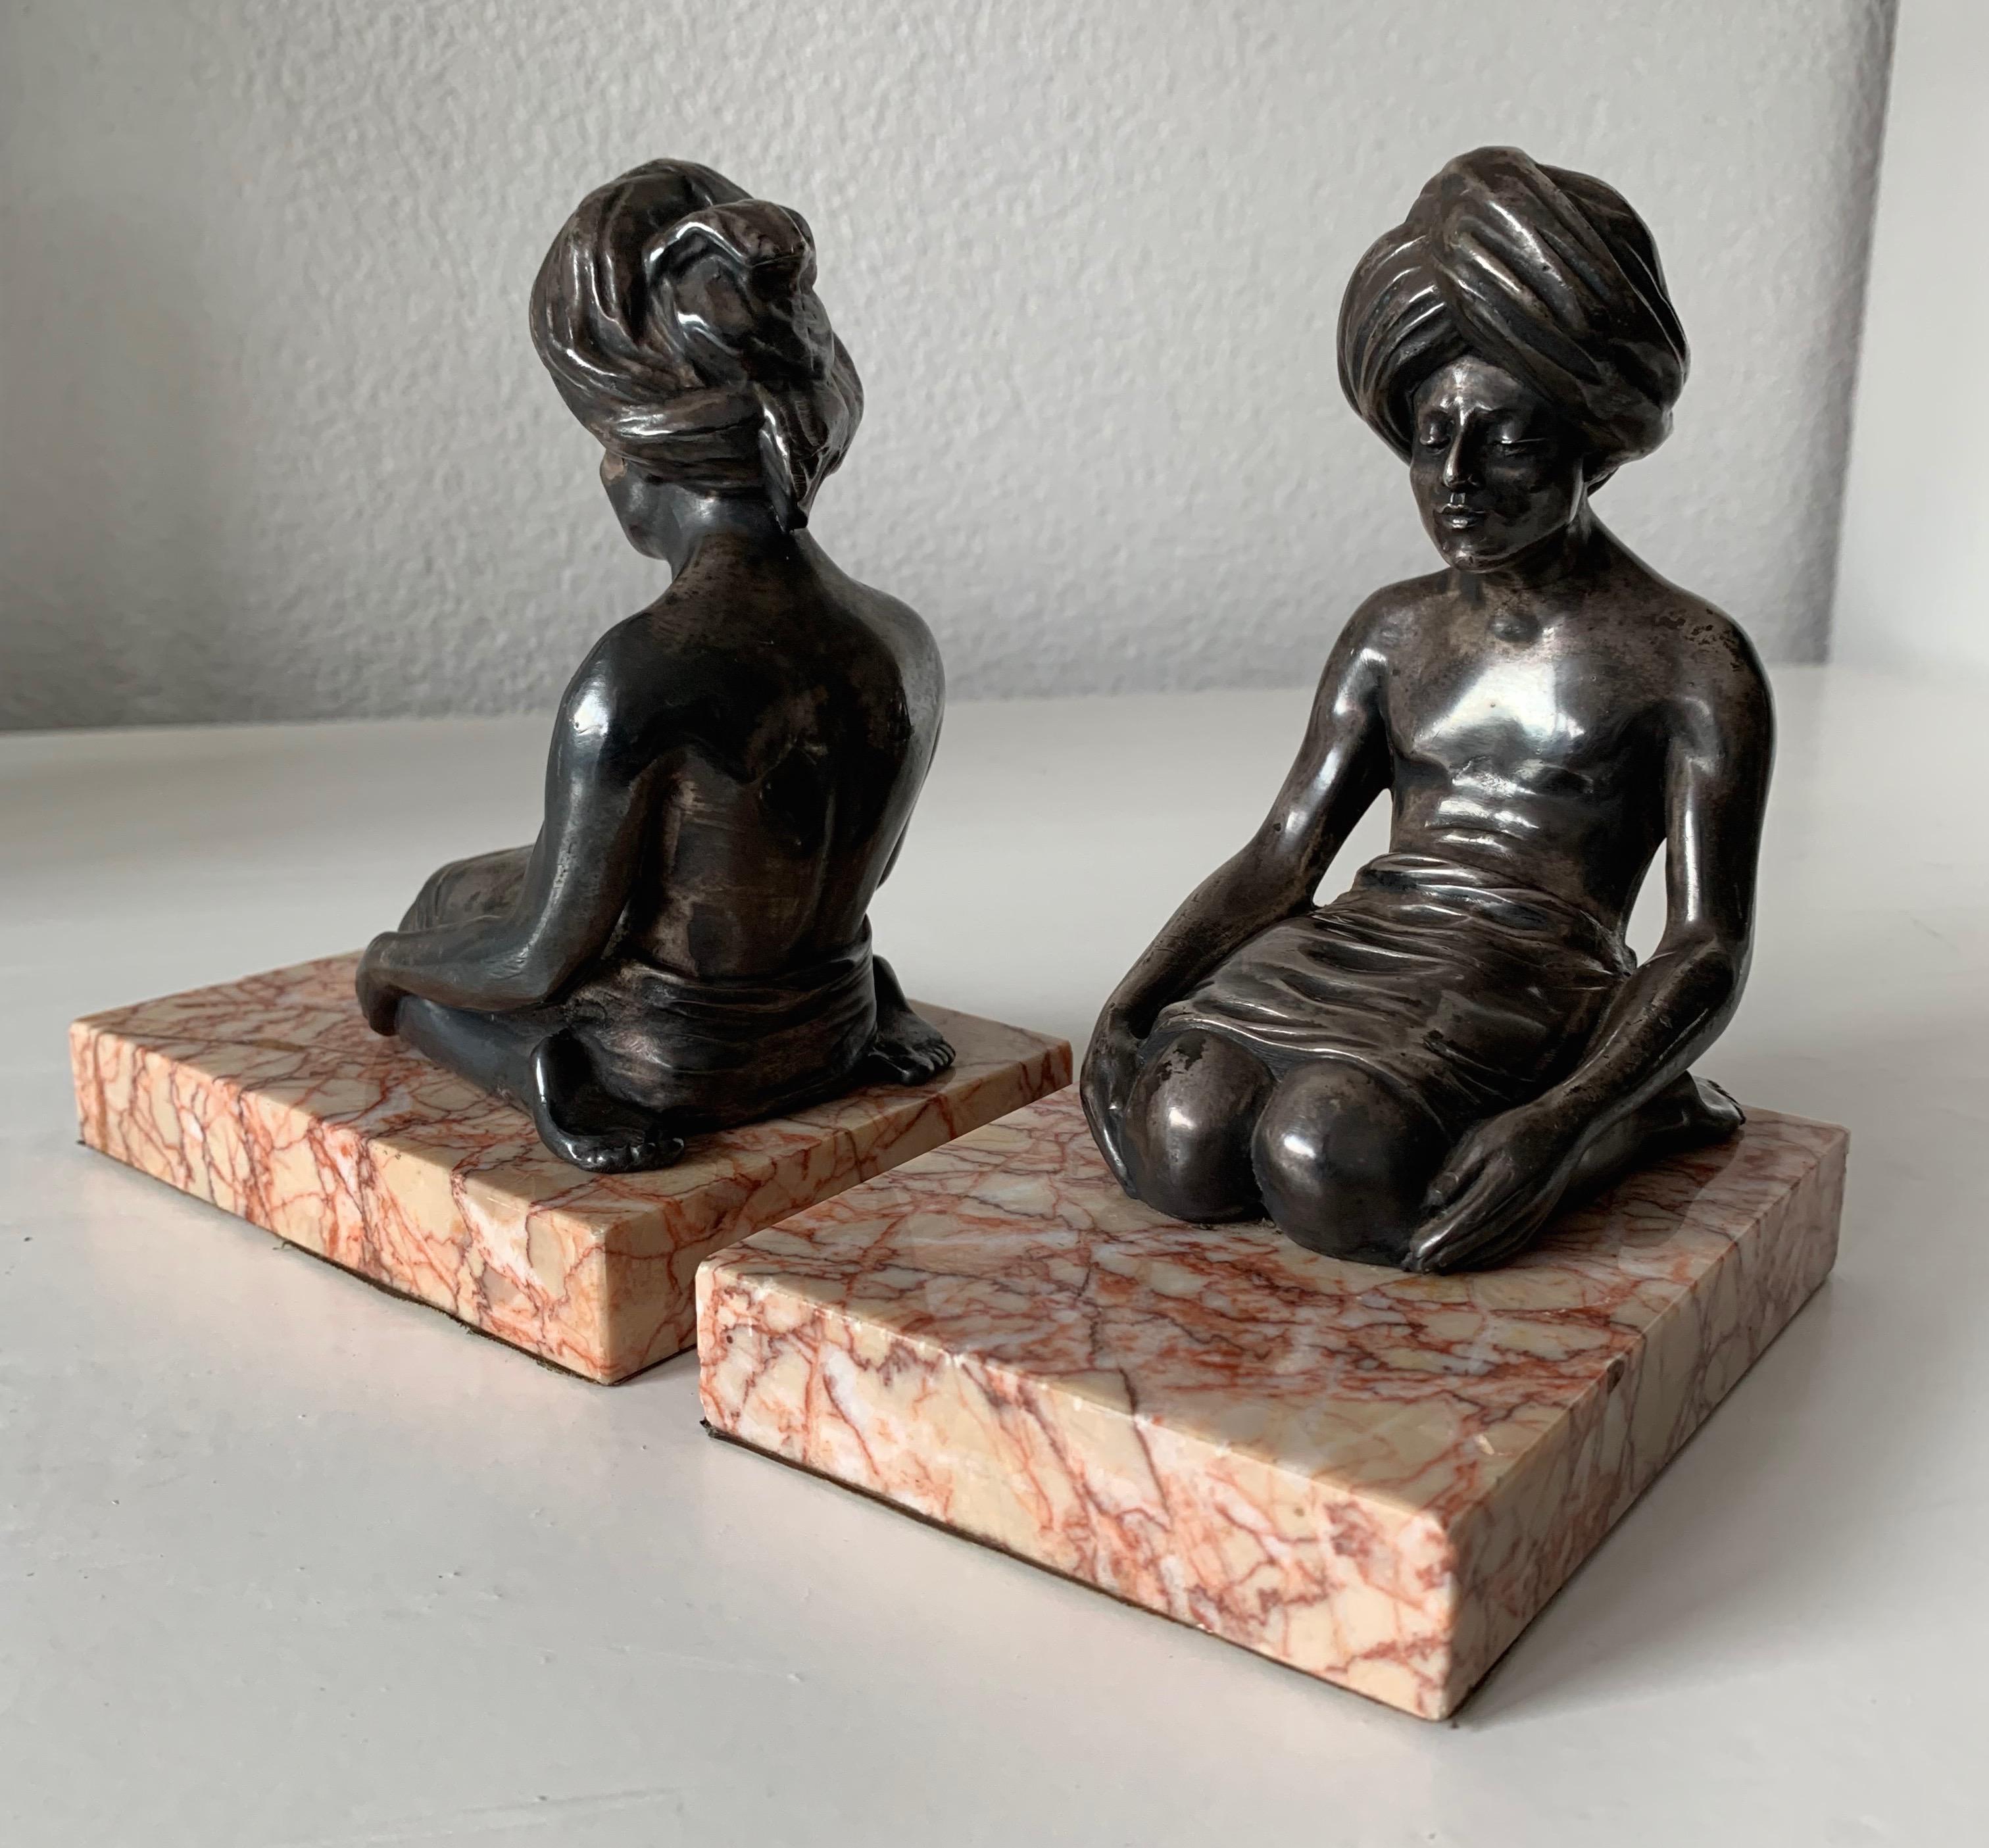 Hand-Crafted Rare Art Deco Bookends, Indian Sculptures in Meditating Position on Marble Base For Sale